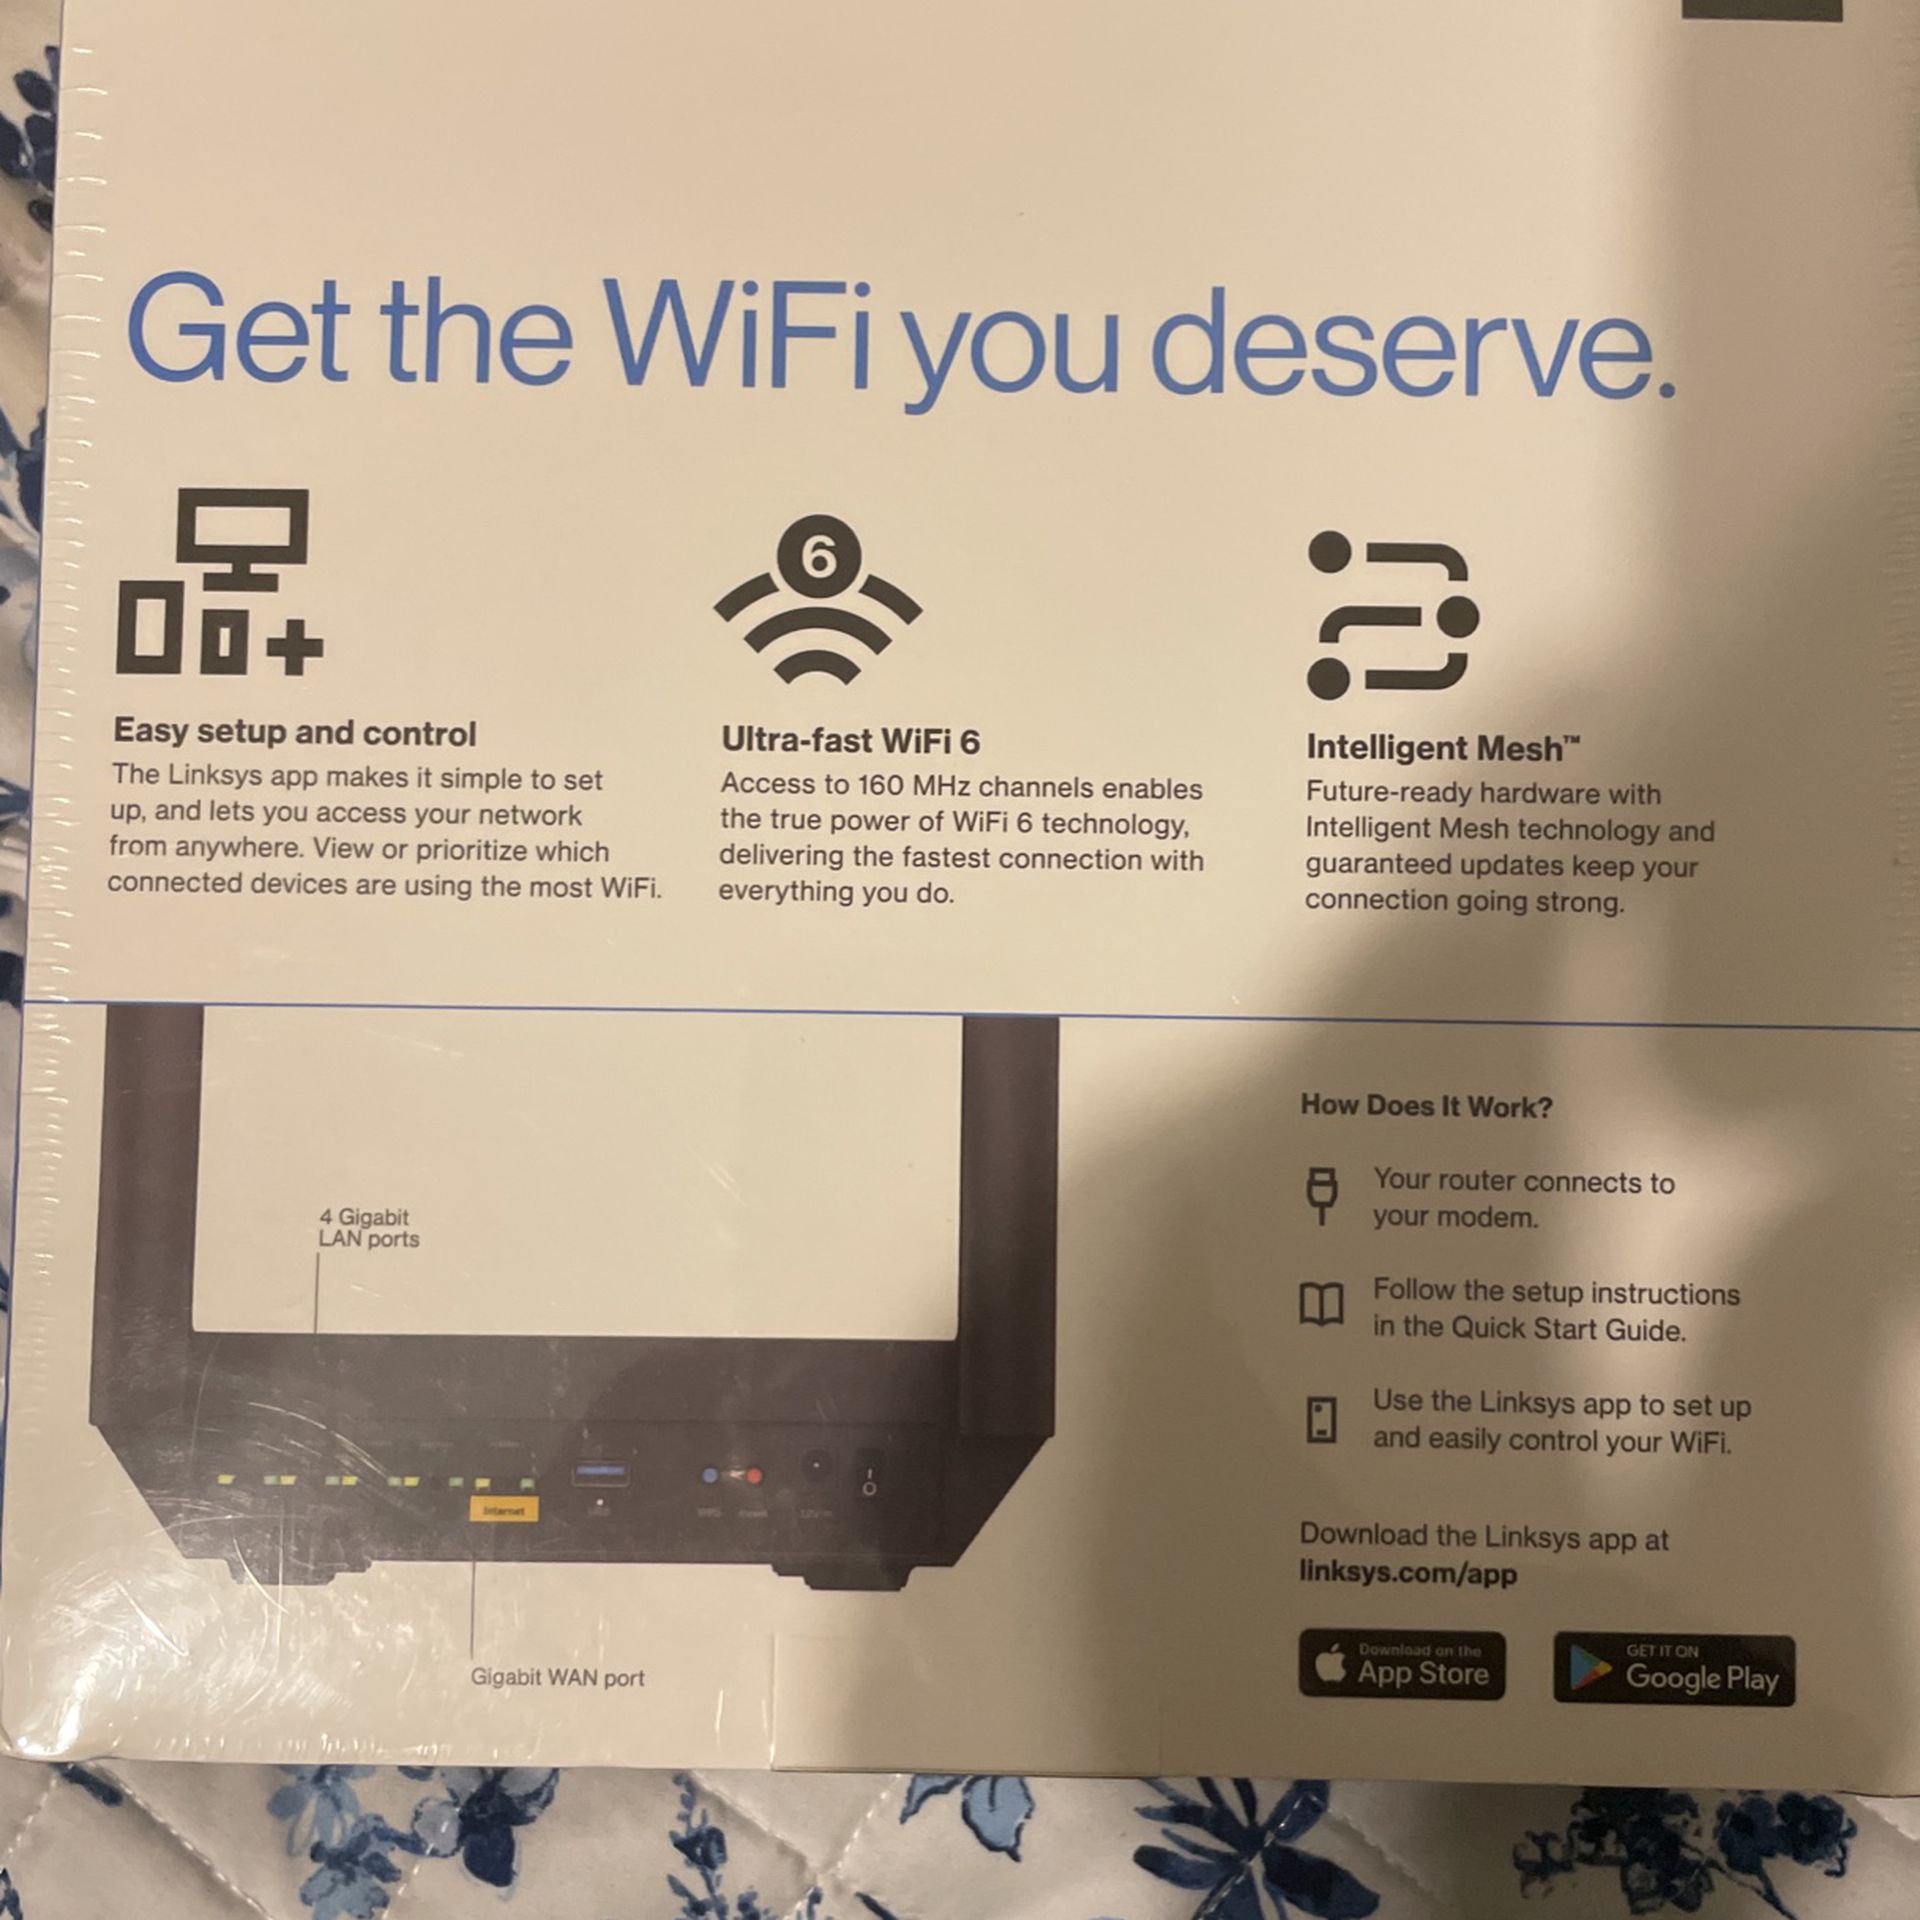 Linksys Hydra Wi-Fi Dual-Band Mesh Router